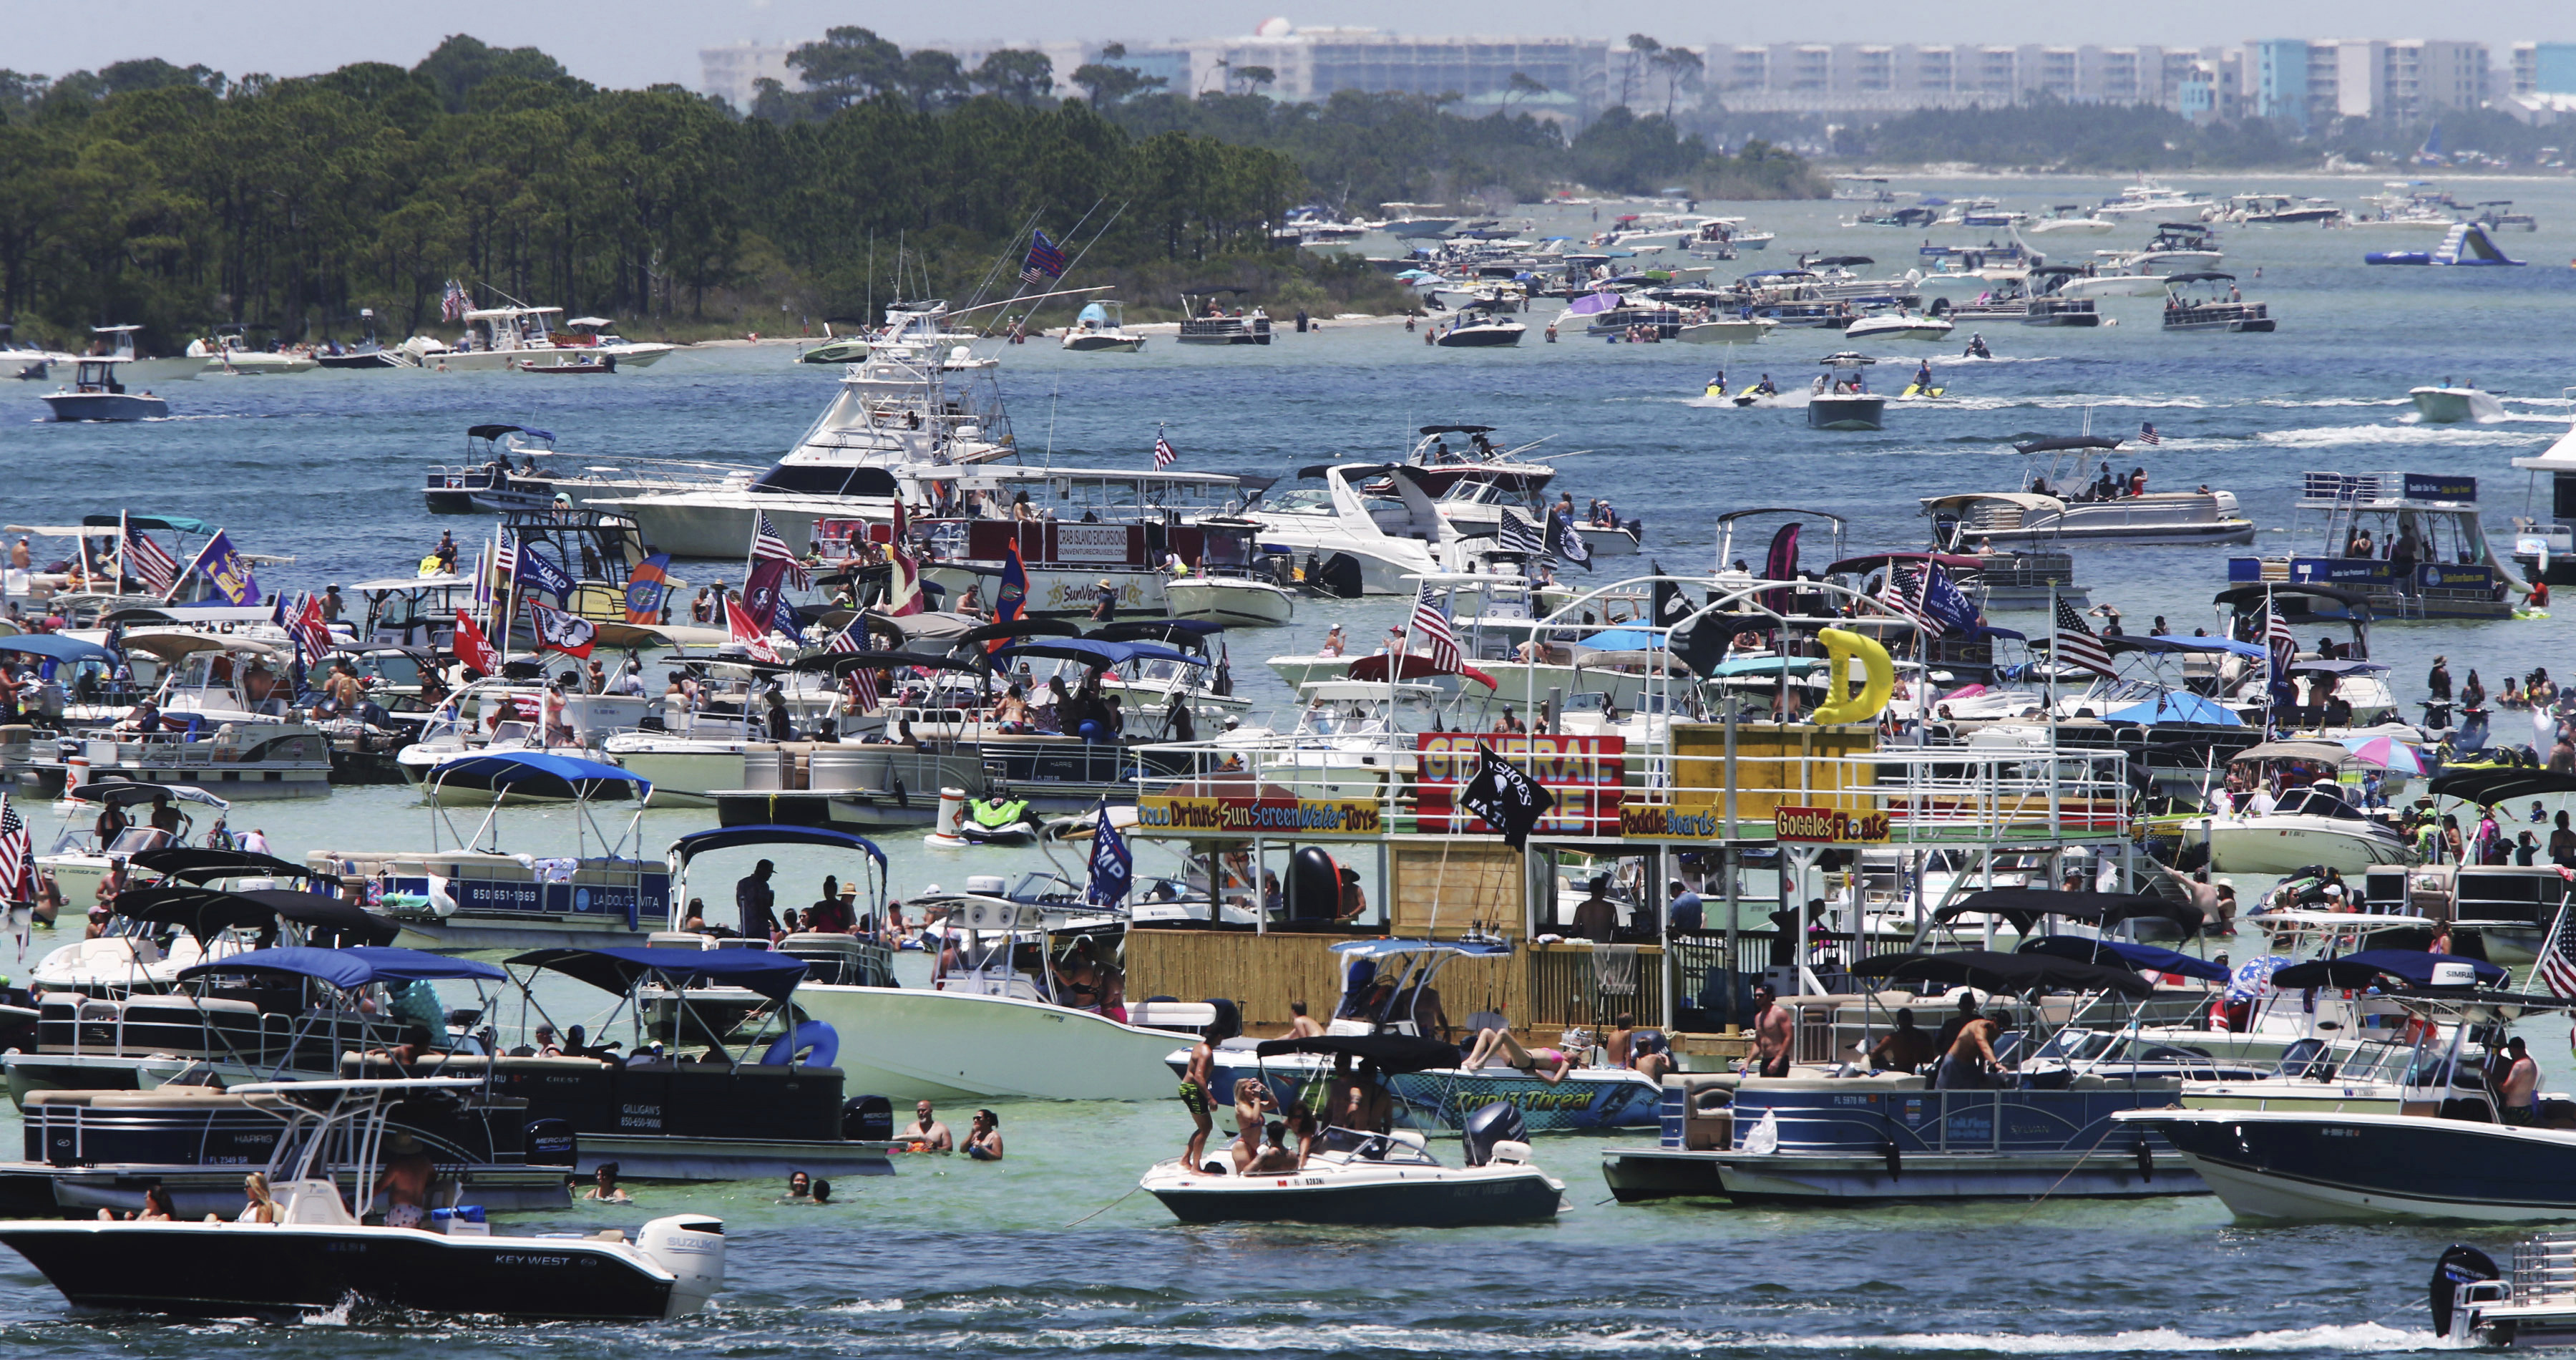 Boaters crowd an area known as "Crab Island" in the shallow waters near Destin,  Florida